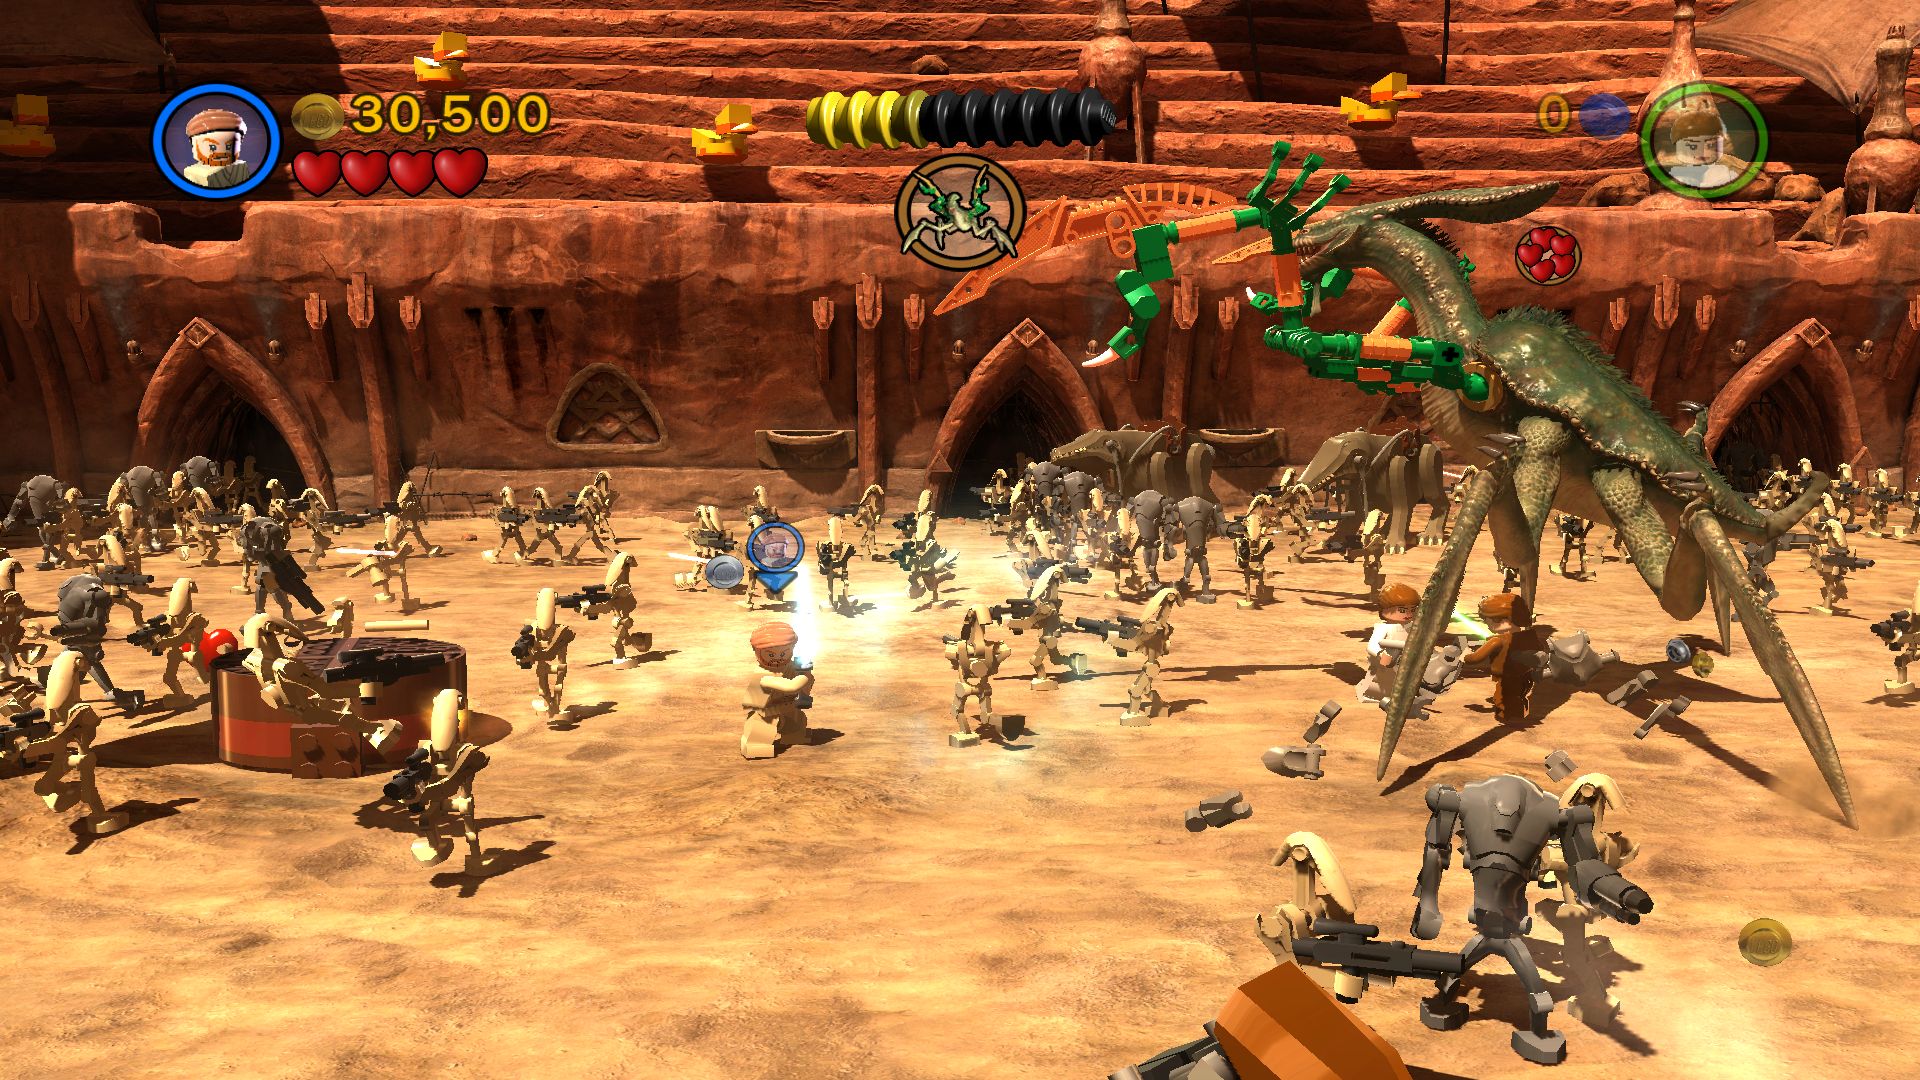 Play lego star wars the video game online for free Lego Star Wars Iii The Clone Wars On Steam